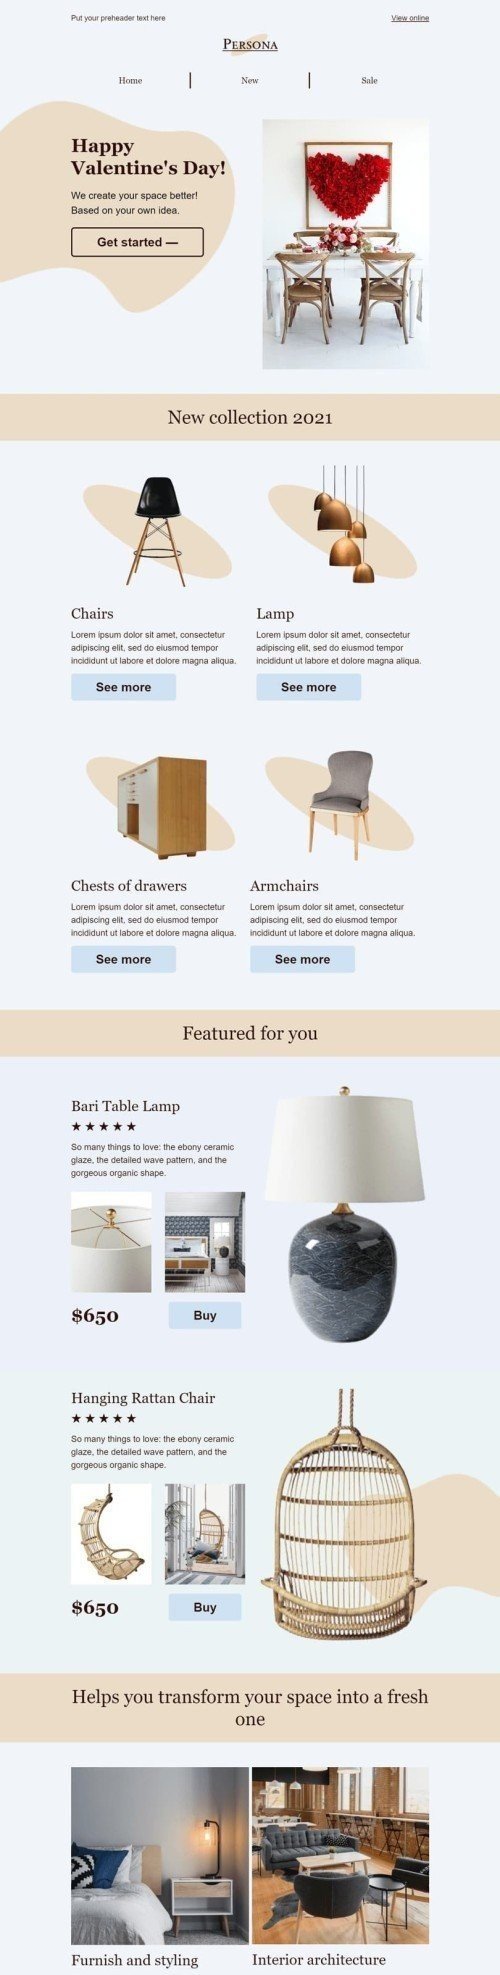 Valentine’s Day Email Template «Romantic design» for Furniture, Interior & DIY industry mobile view